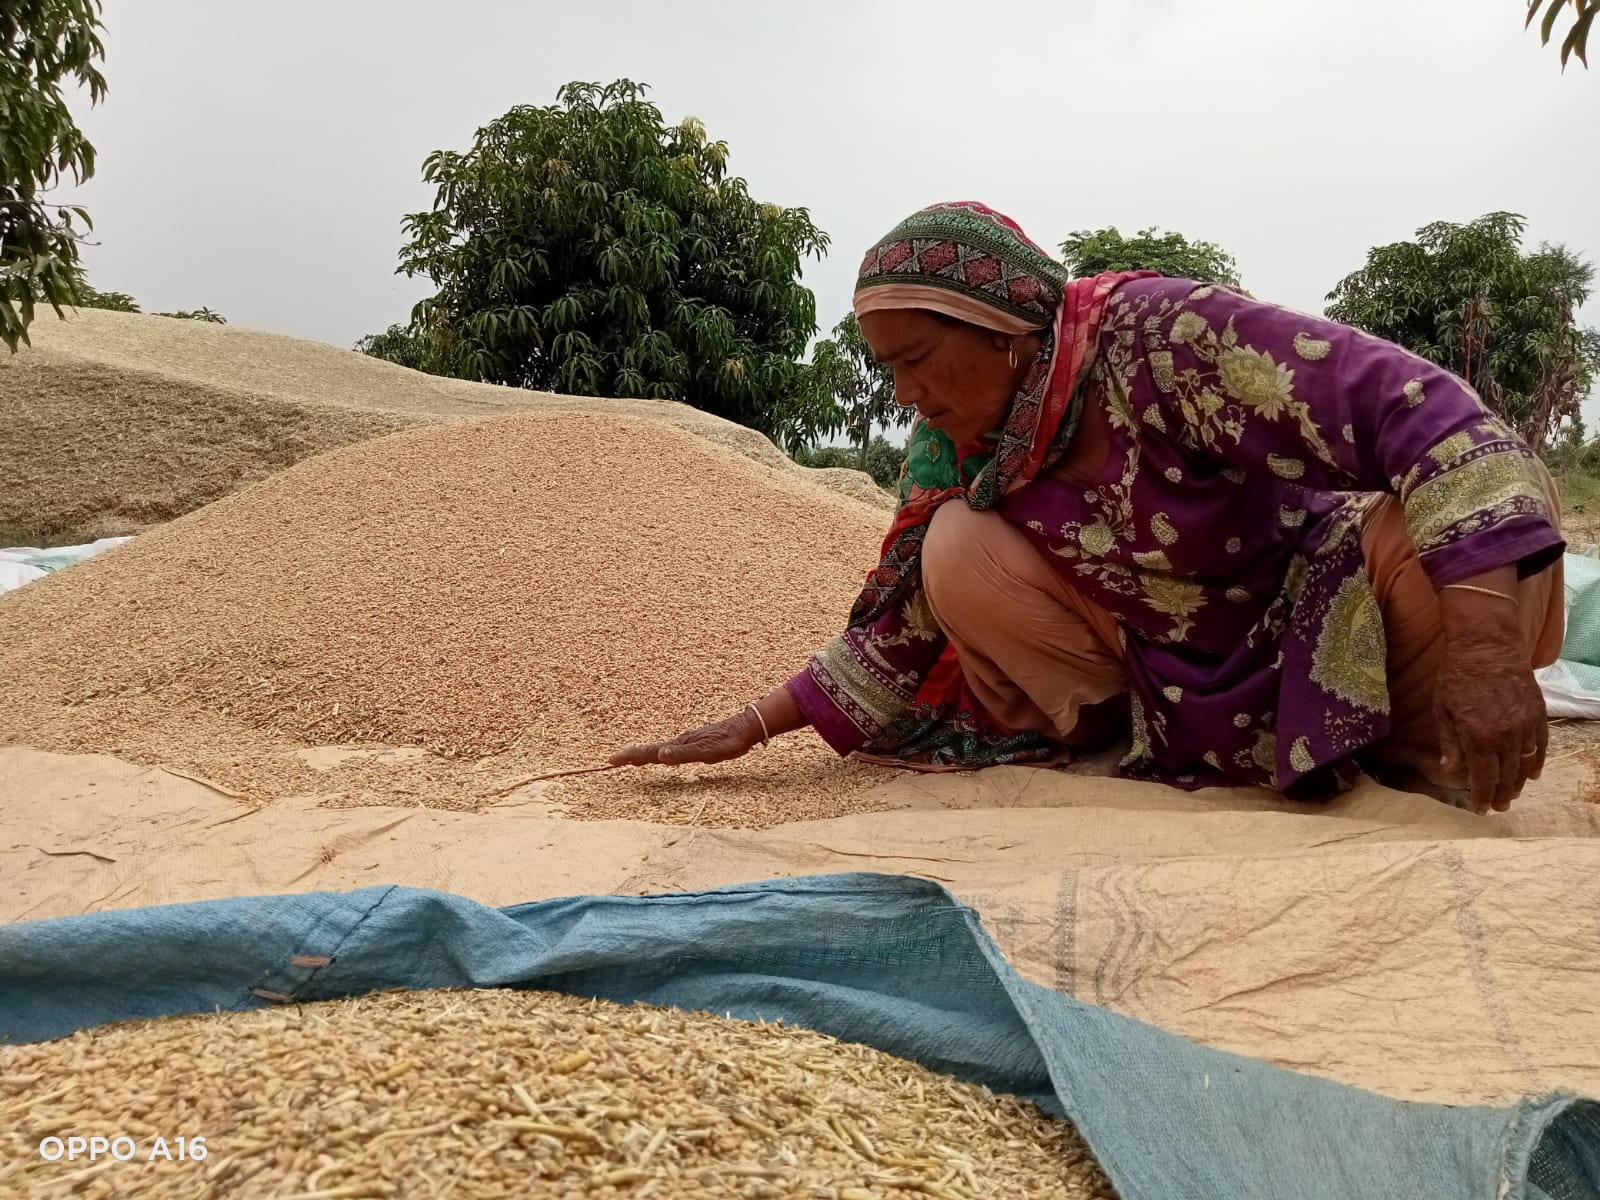 A woman crouches and holds her hand over seeds on the ground. She is surrounded by piles of the seeds.